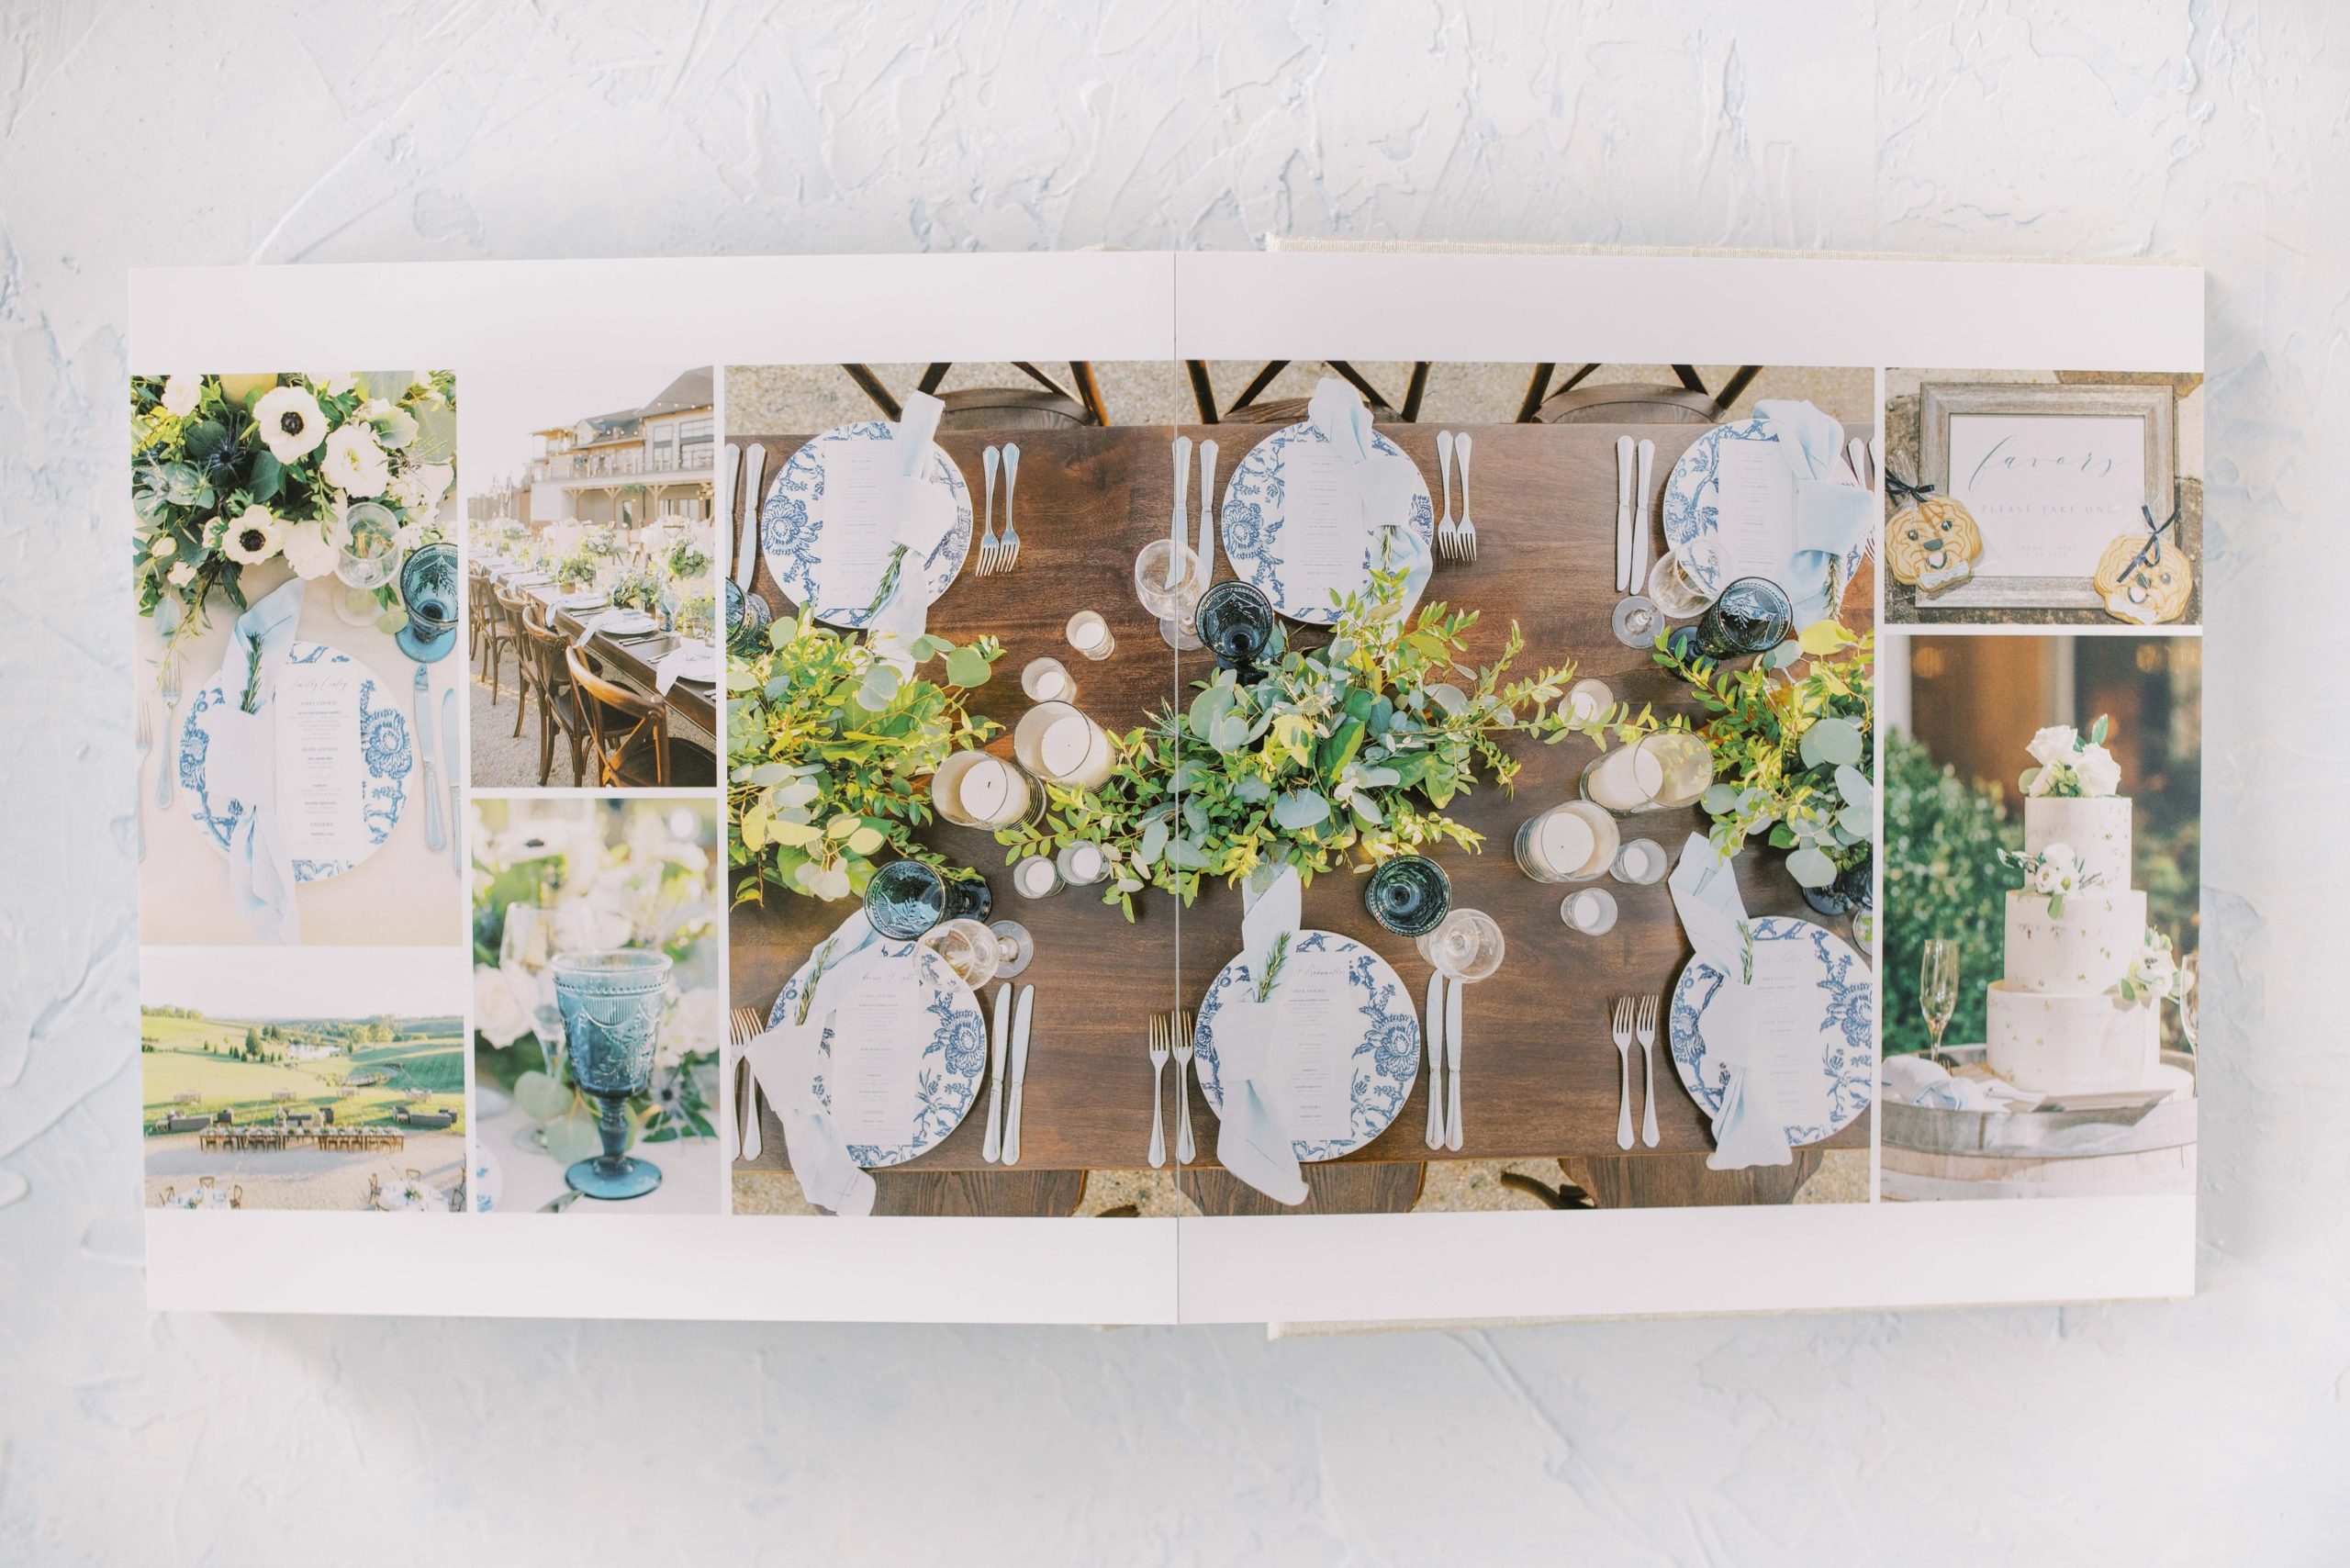 A stunning cream silk heirloom album from a beautiful outdoor wedding captured at Stone Tower Winery in Leesburg, VA.